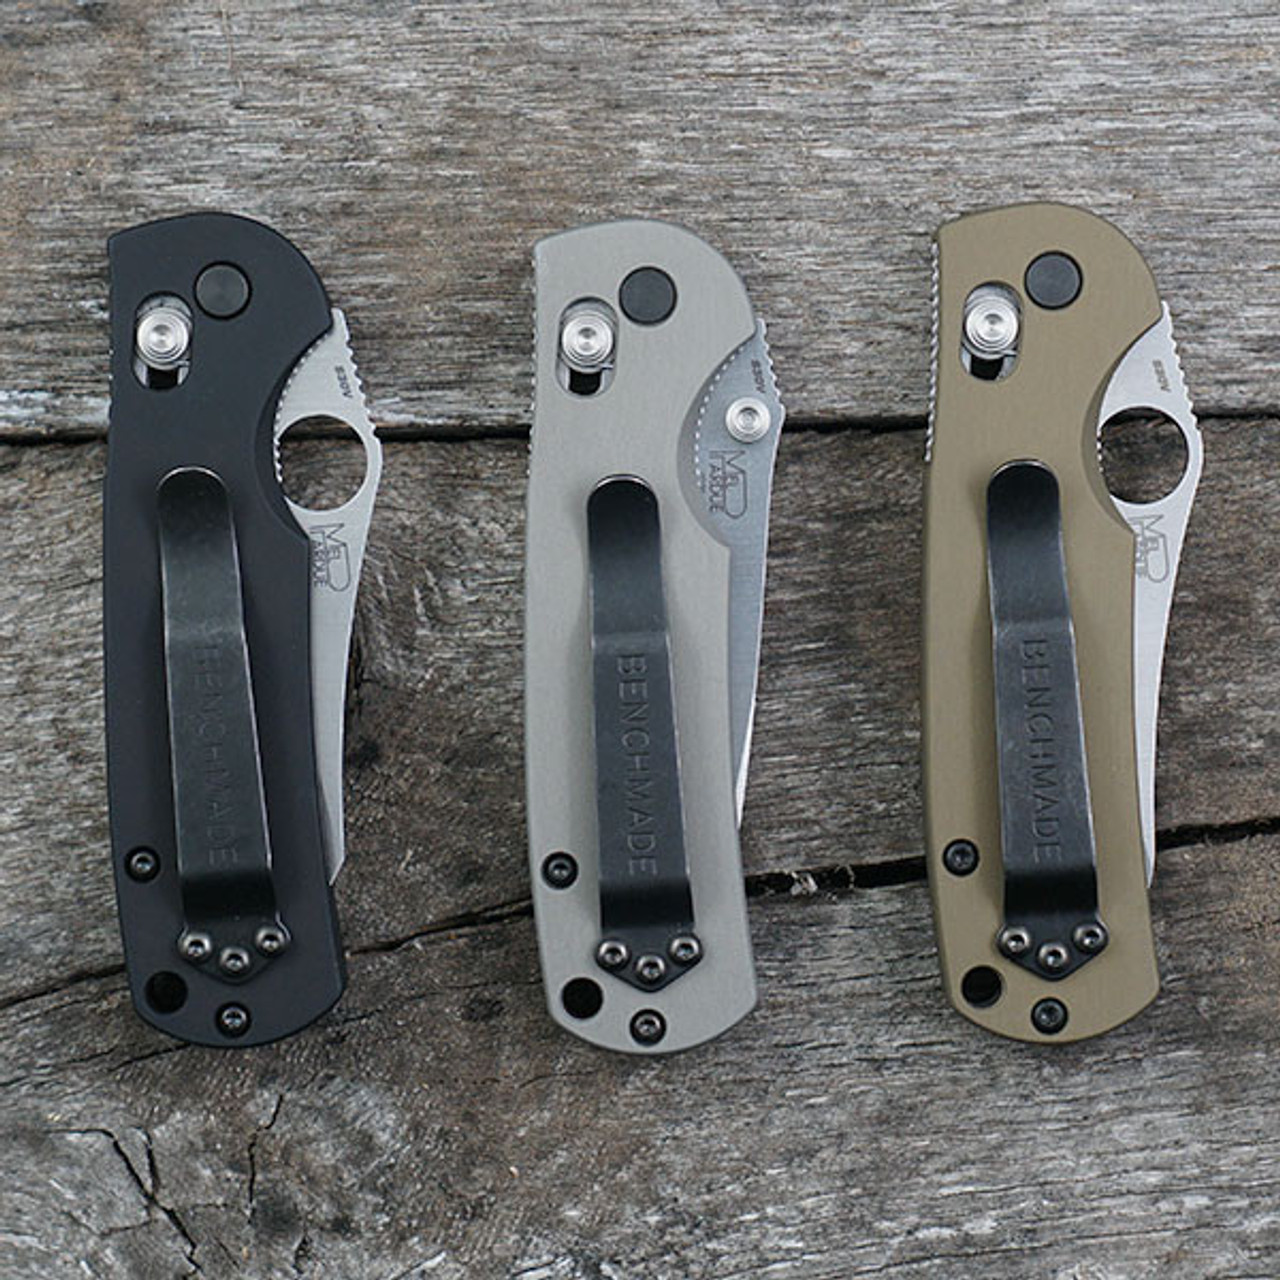 Benchmade Dresses Up Mini Grip with New Premium Configuration »